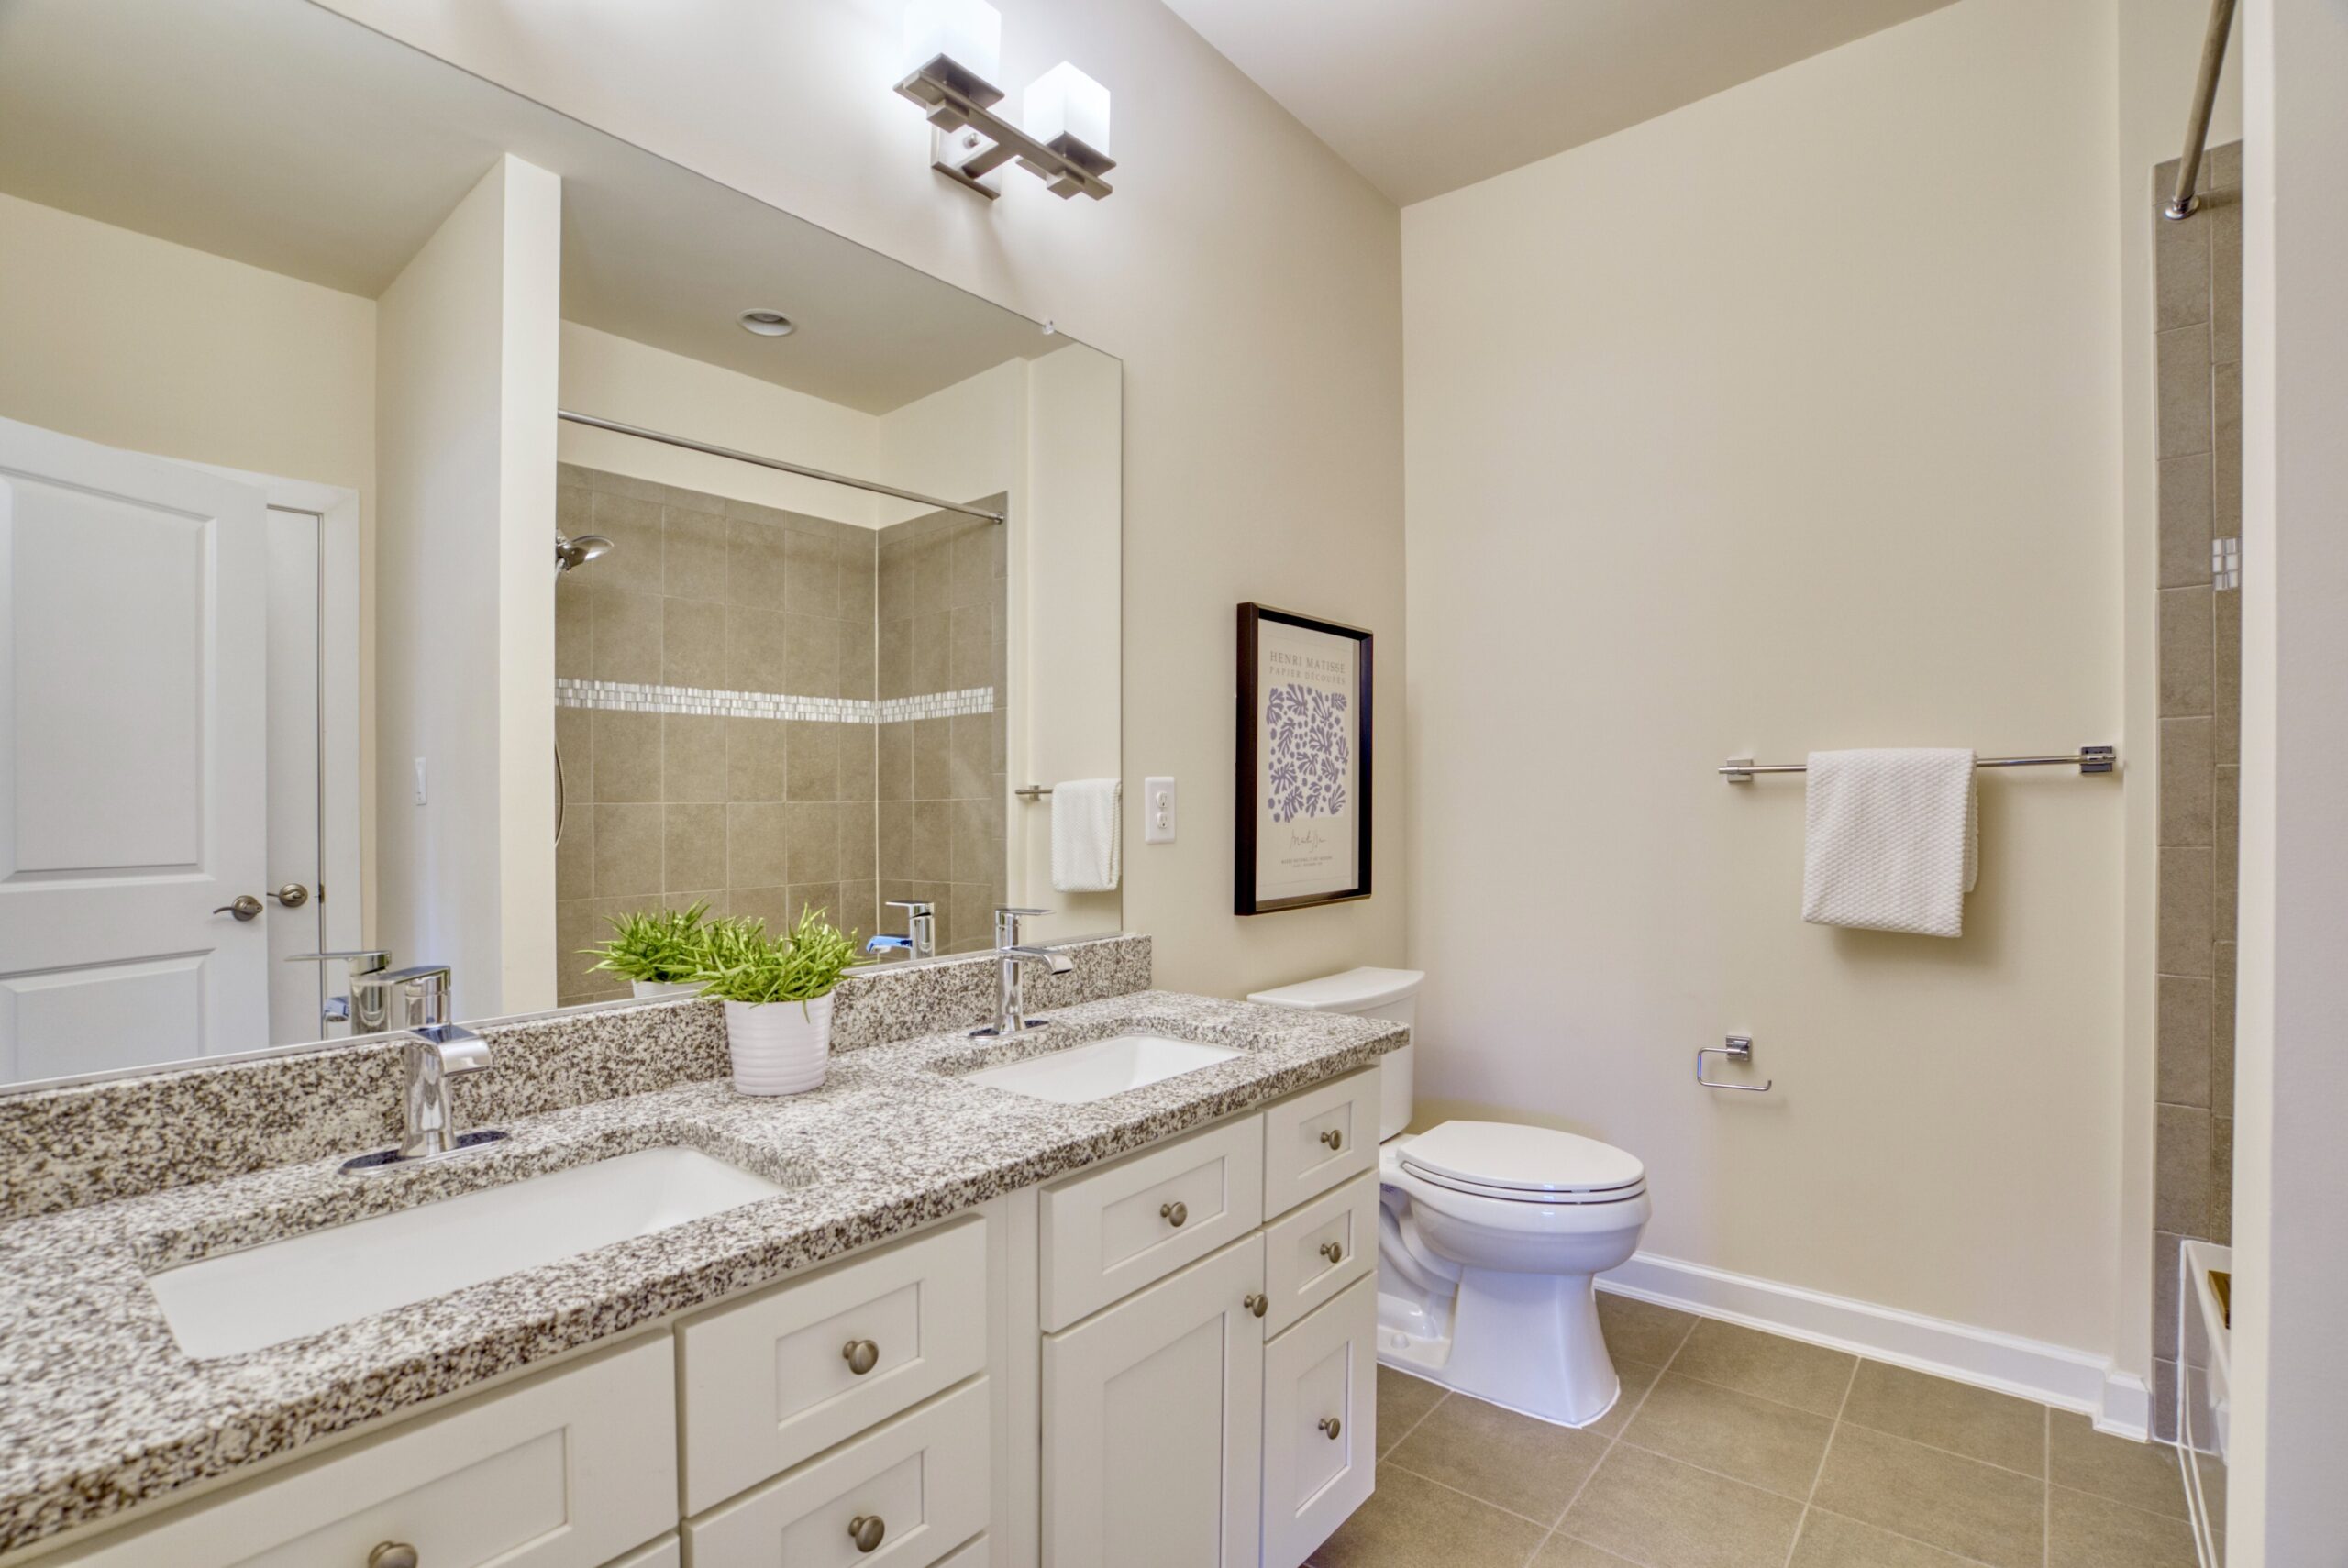 Professional interior photo of 3165 Virginia Bluebell Ct, Fairfax - showing a full bathroom with granite counters and dual vanity with fully tiled shower reflecting in the mirror